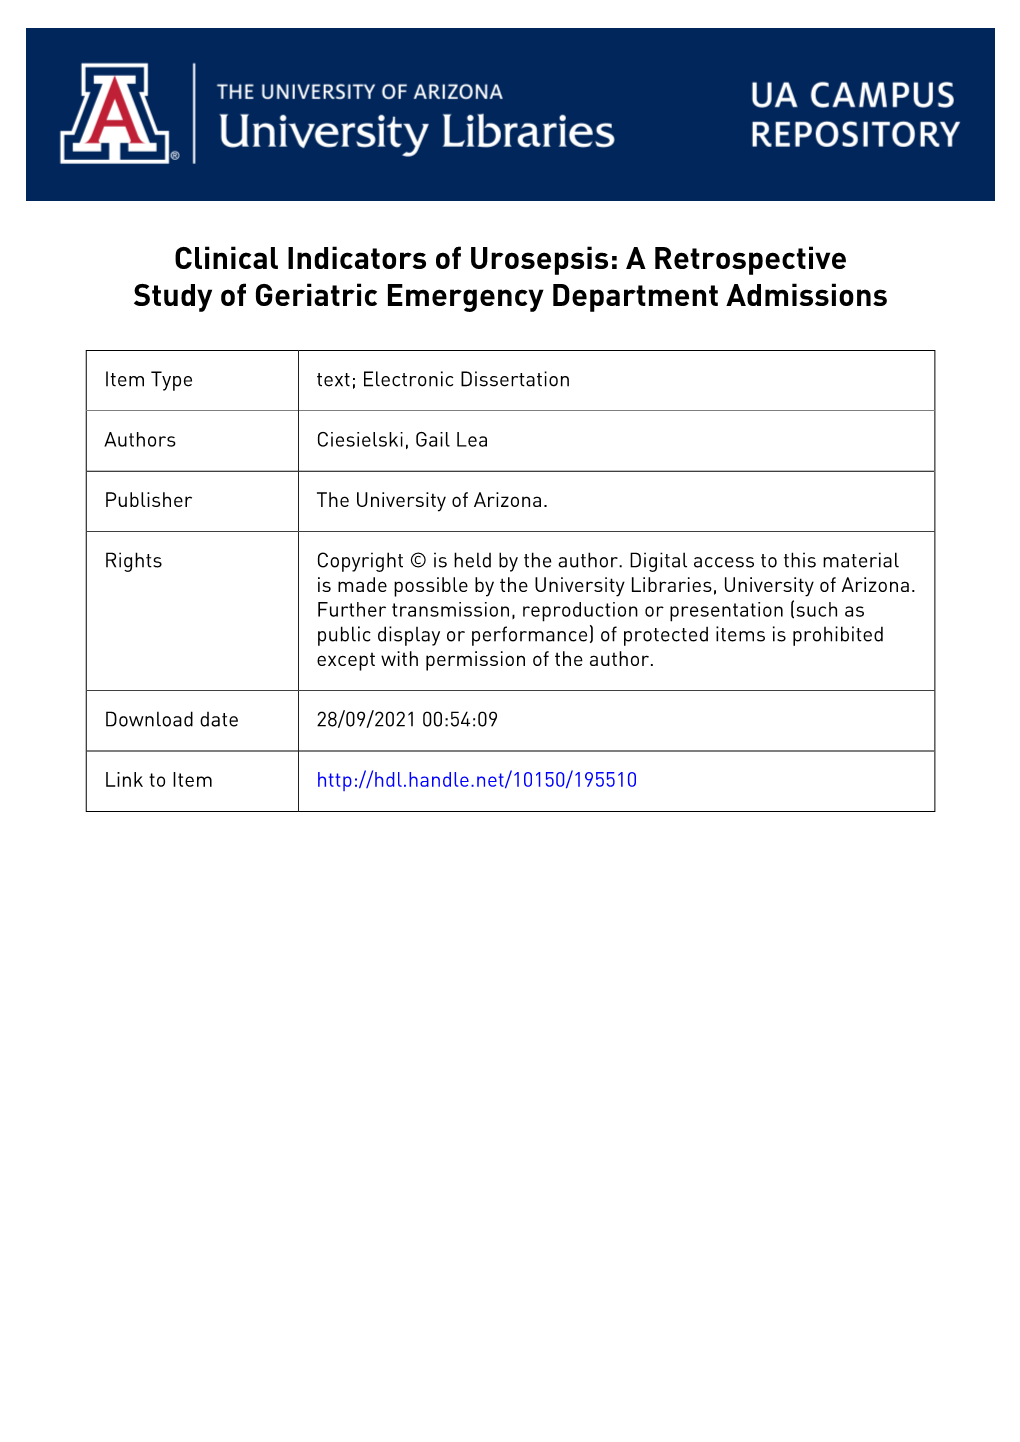 Clinical Indicators of Urosepsis: a Retrospective Study of Geriatric Emergency Department Admissions